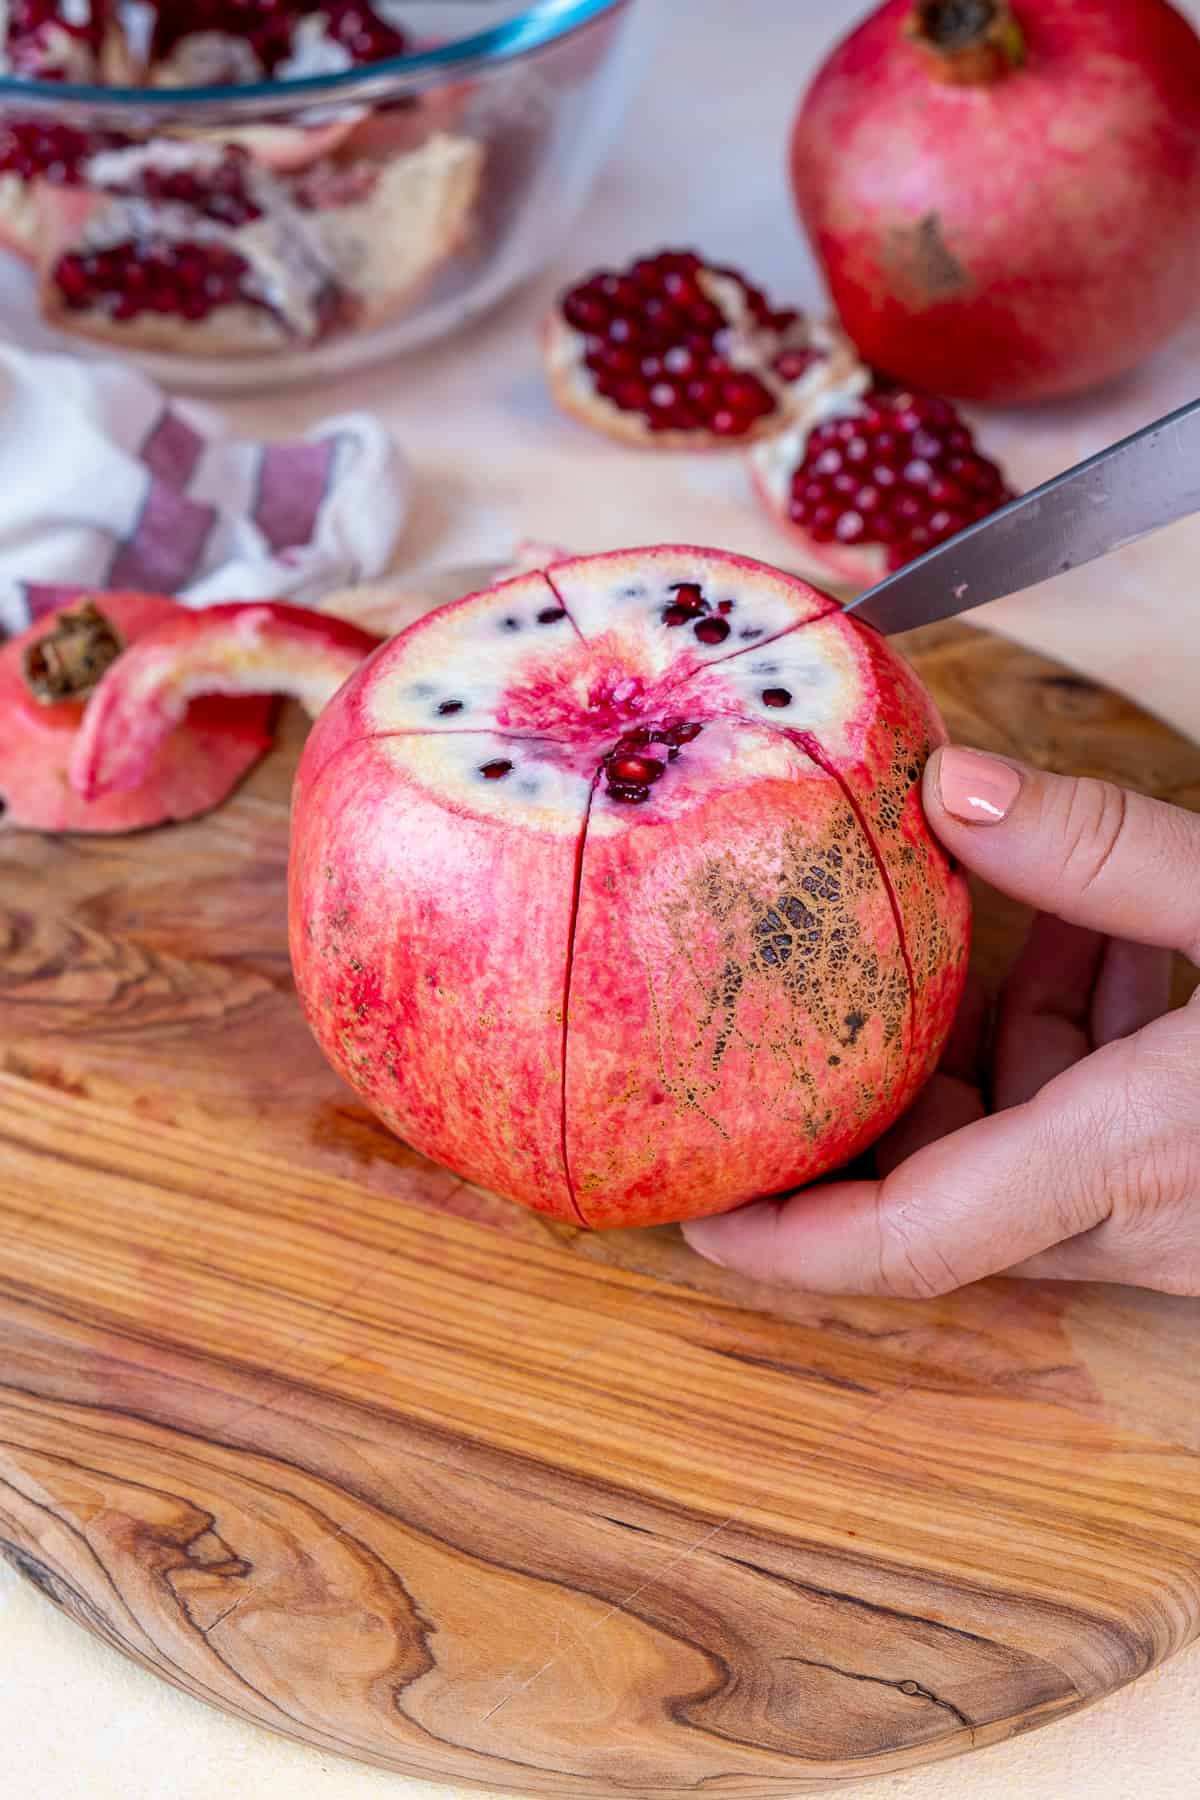 Hands showing how to cut a pomegranate into segments.